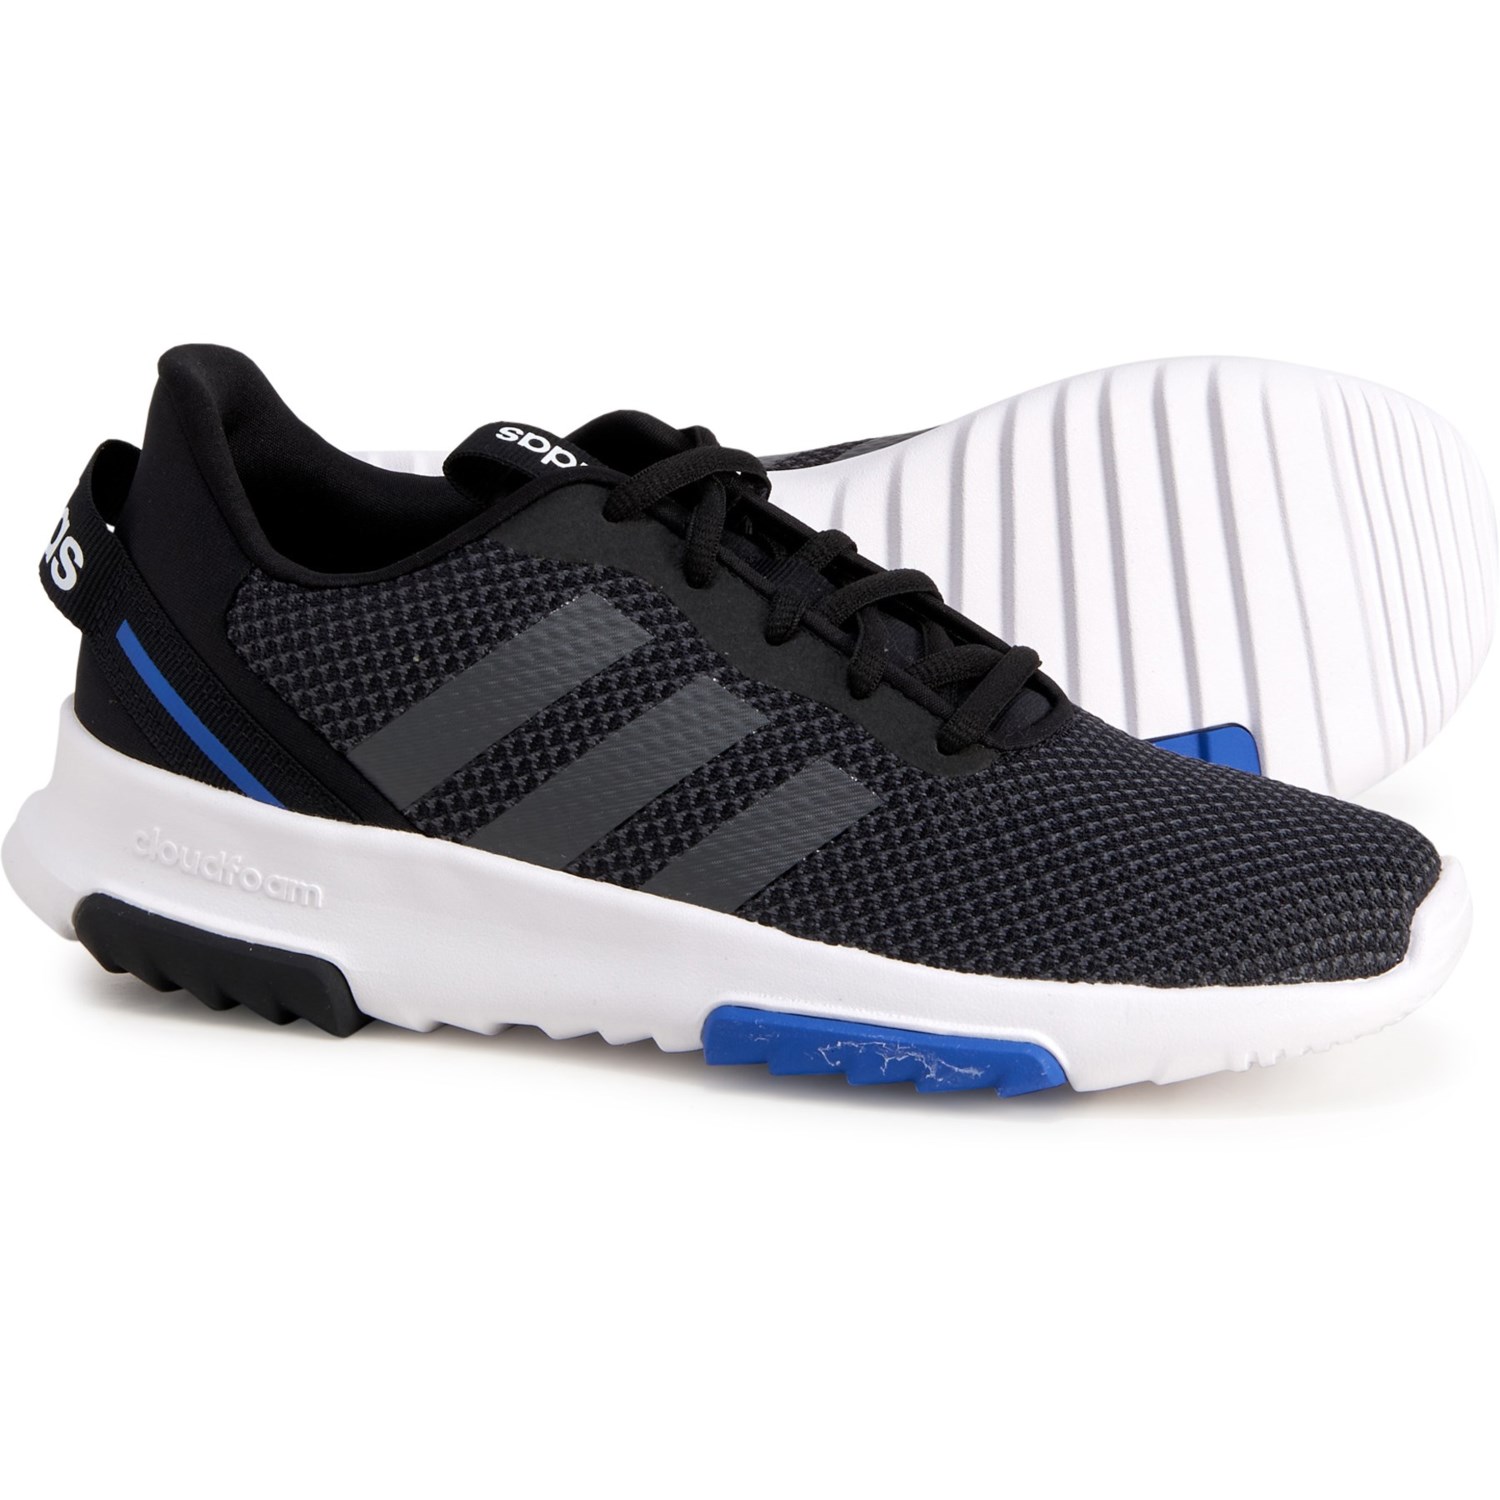 adidas racer tr running shoes